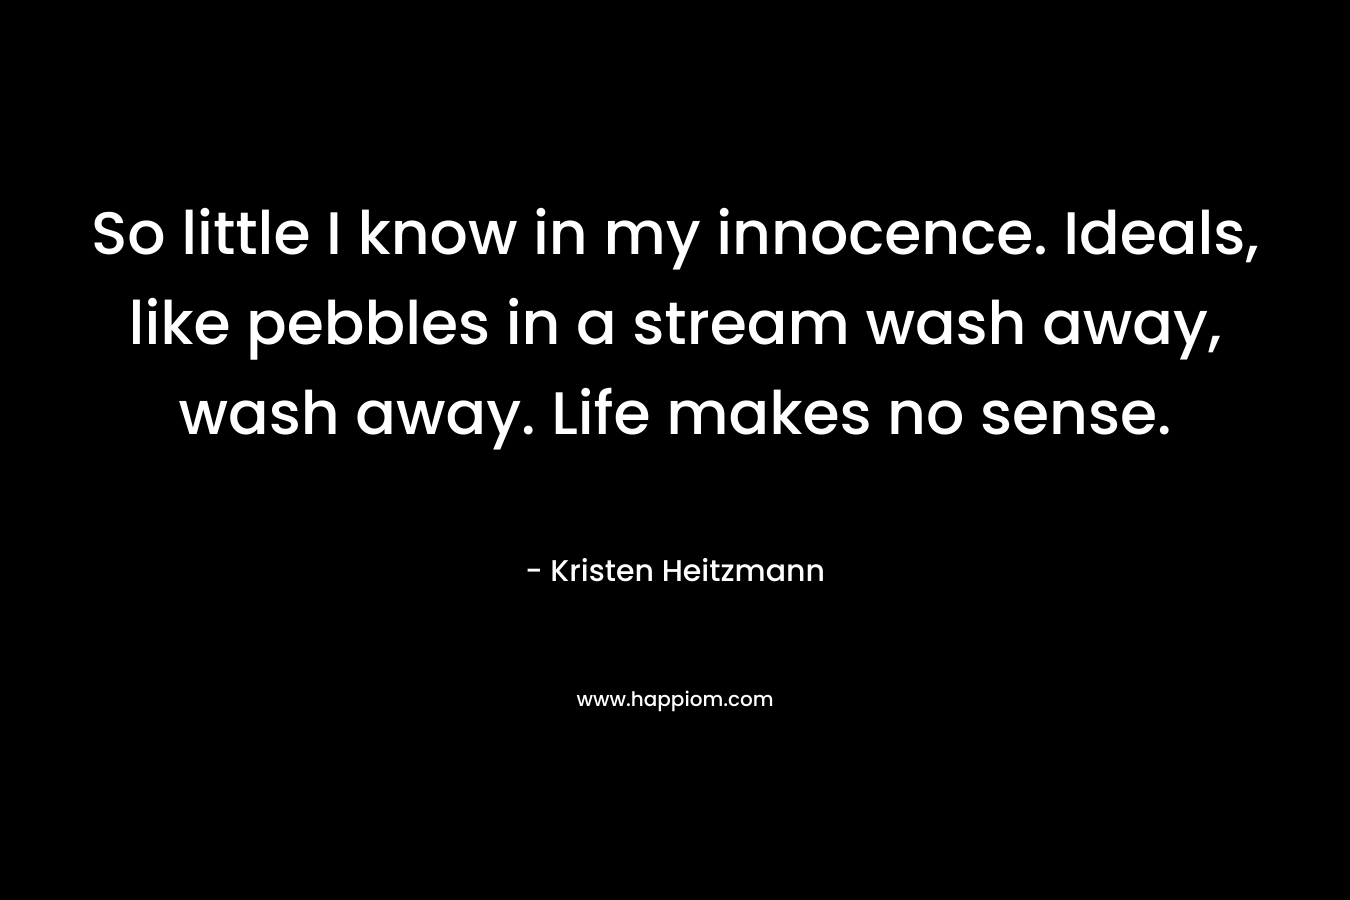 So little I know in my innocence. Ideals, like pebbles in a stream wash away, wash away. Life makes no sense.